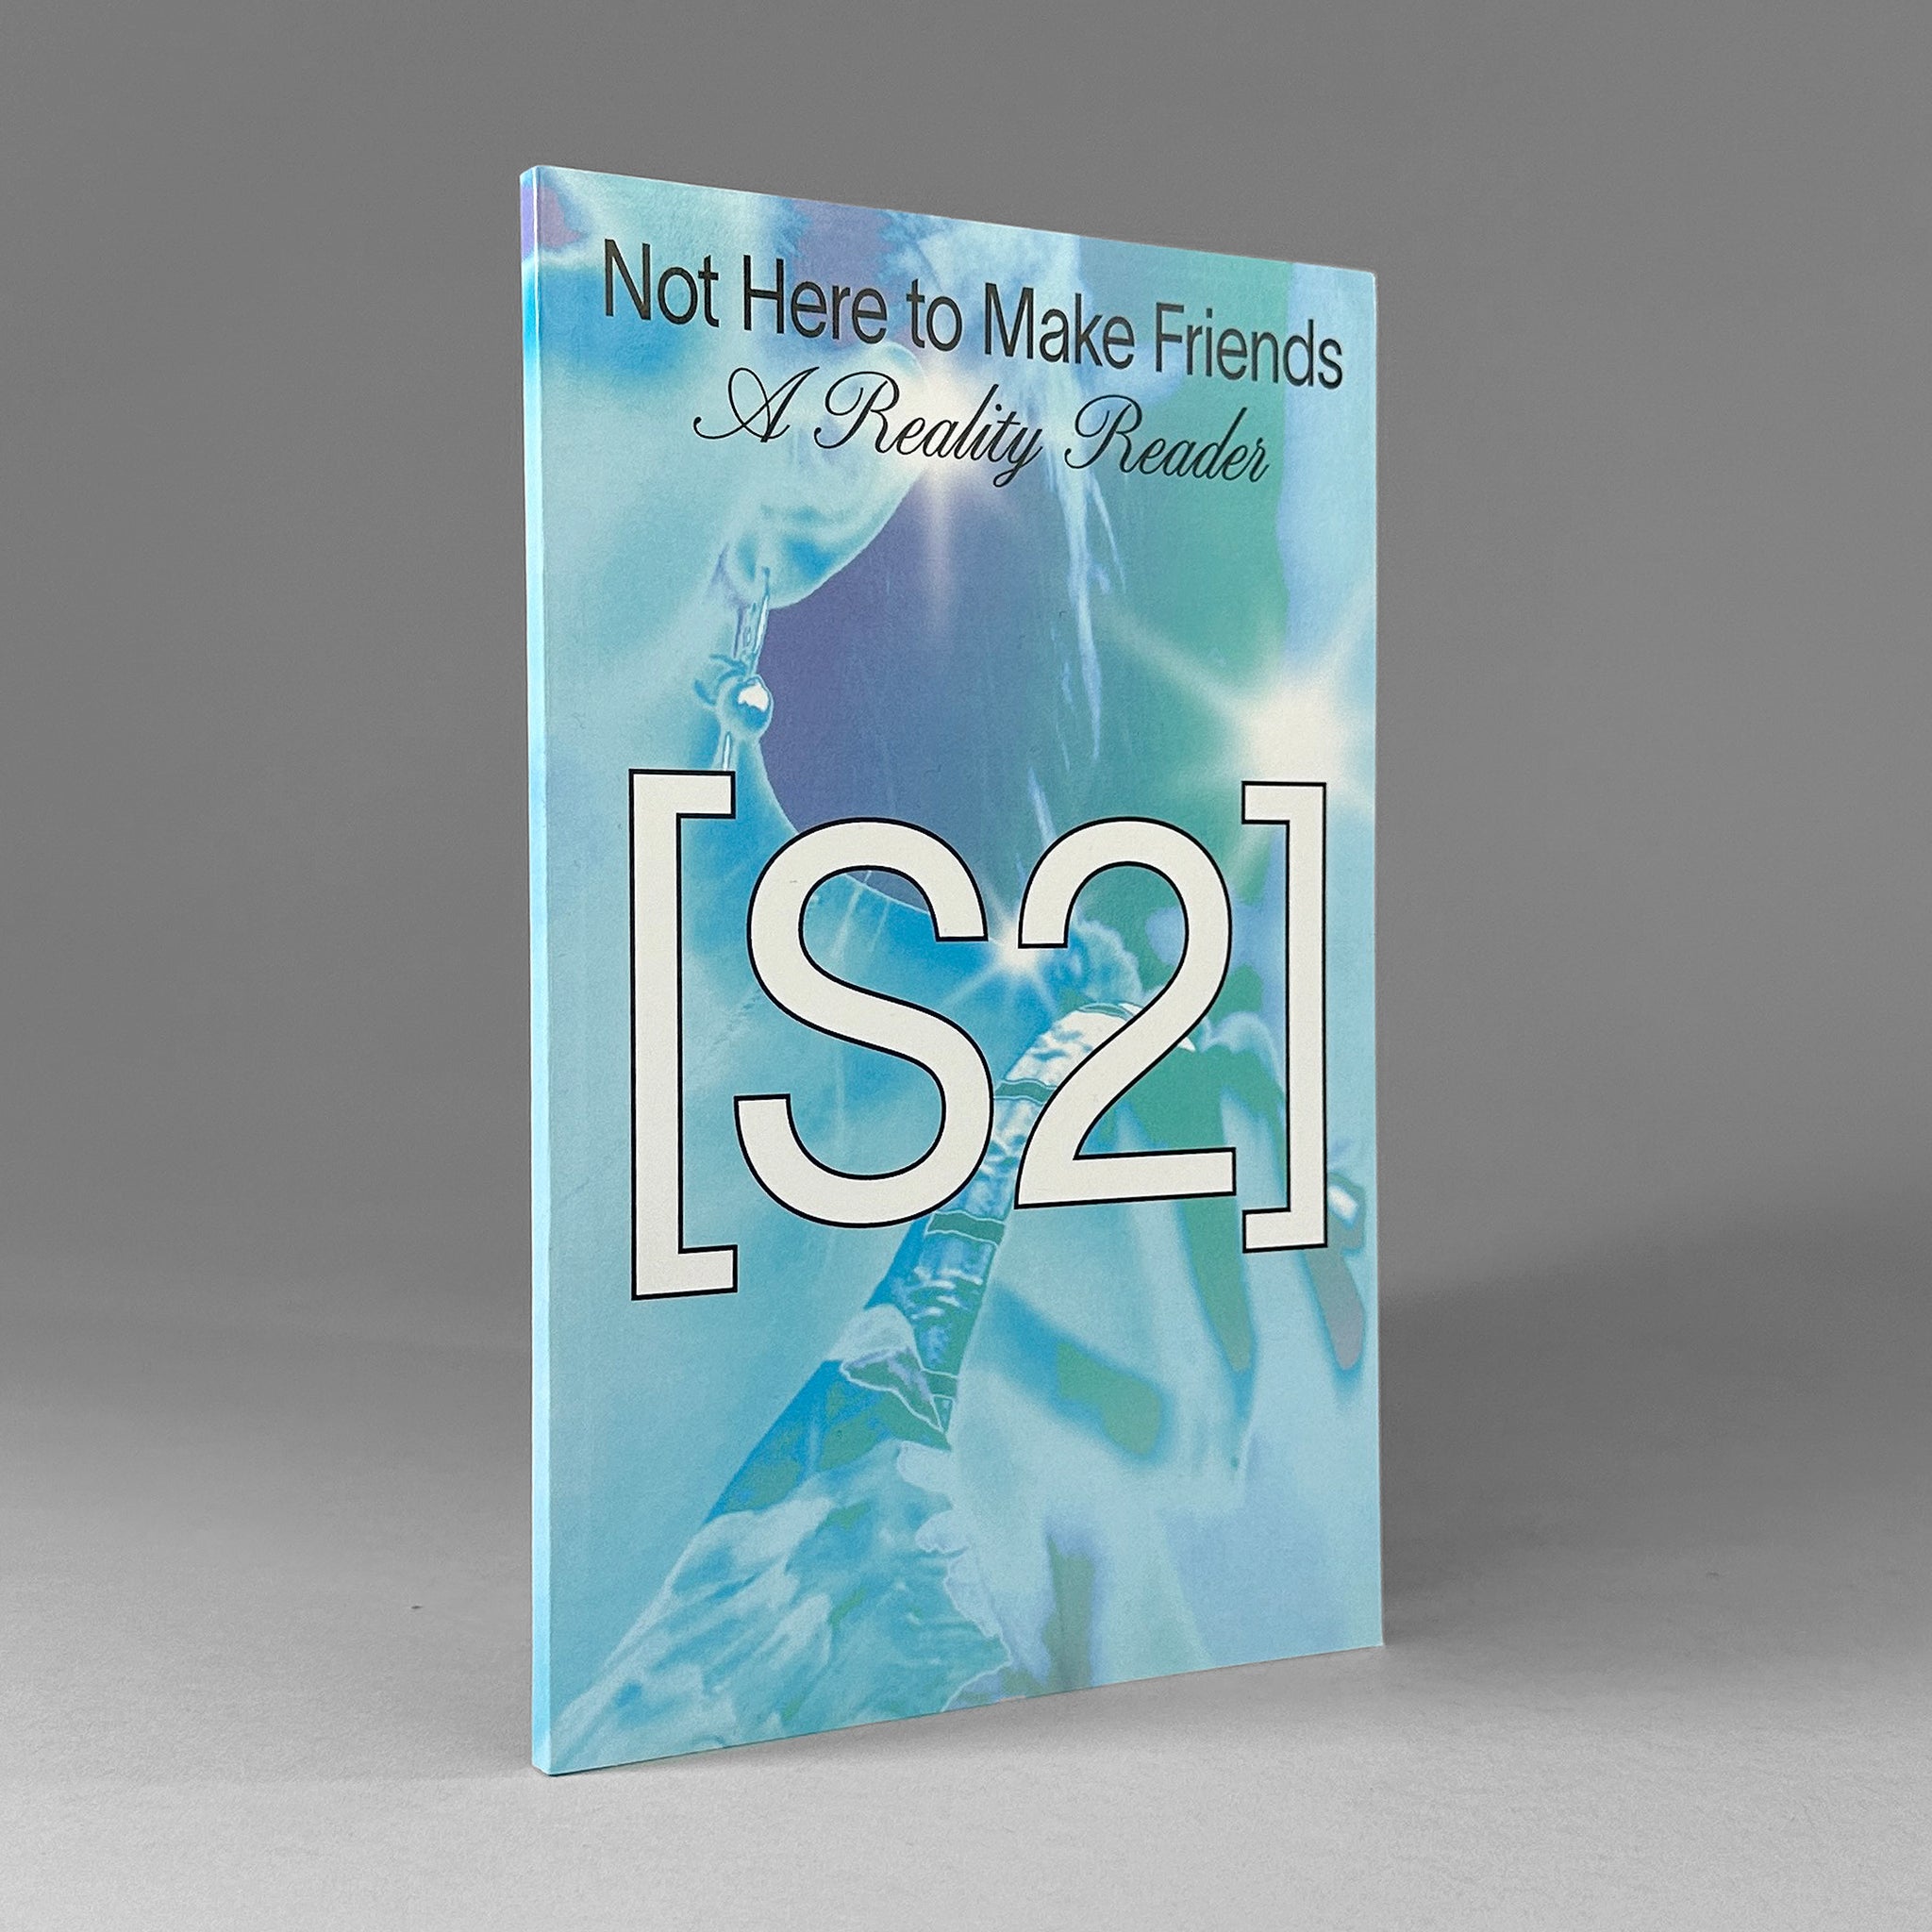 Not Here to Make Friends: A Reality Reader (Season 2)